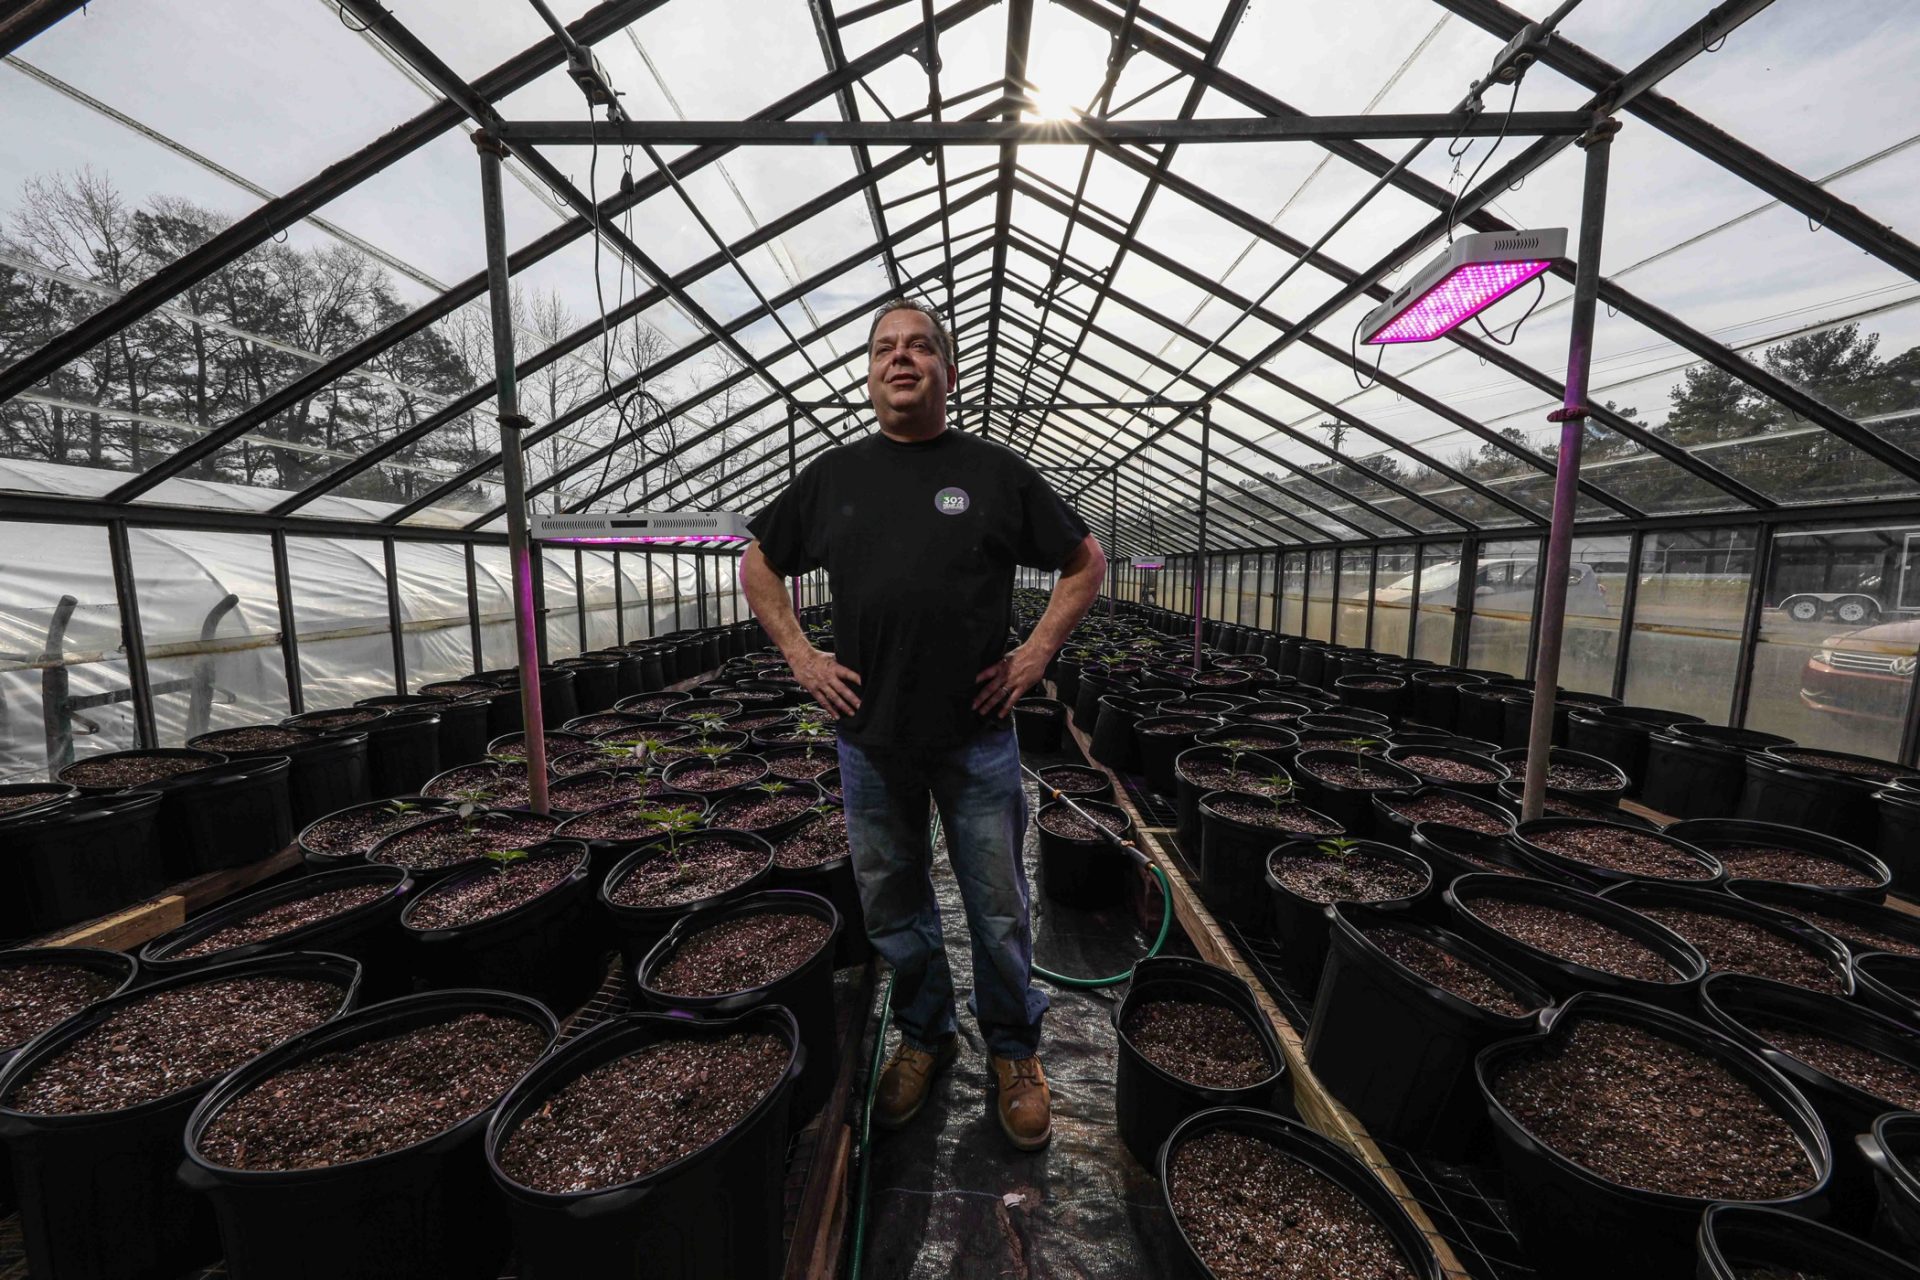 Mike Spray, a hemp grower, poses for a photo in a greenhouse Monday, Feb. 03, 2020, at 302 Hemp Co, in Georgetown, Del. It’s been a year since the hemp growing pilot program in Delaware started and the USDA has made regulations for hemp growing.